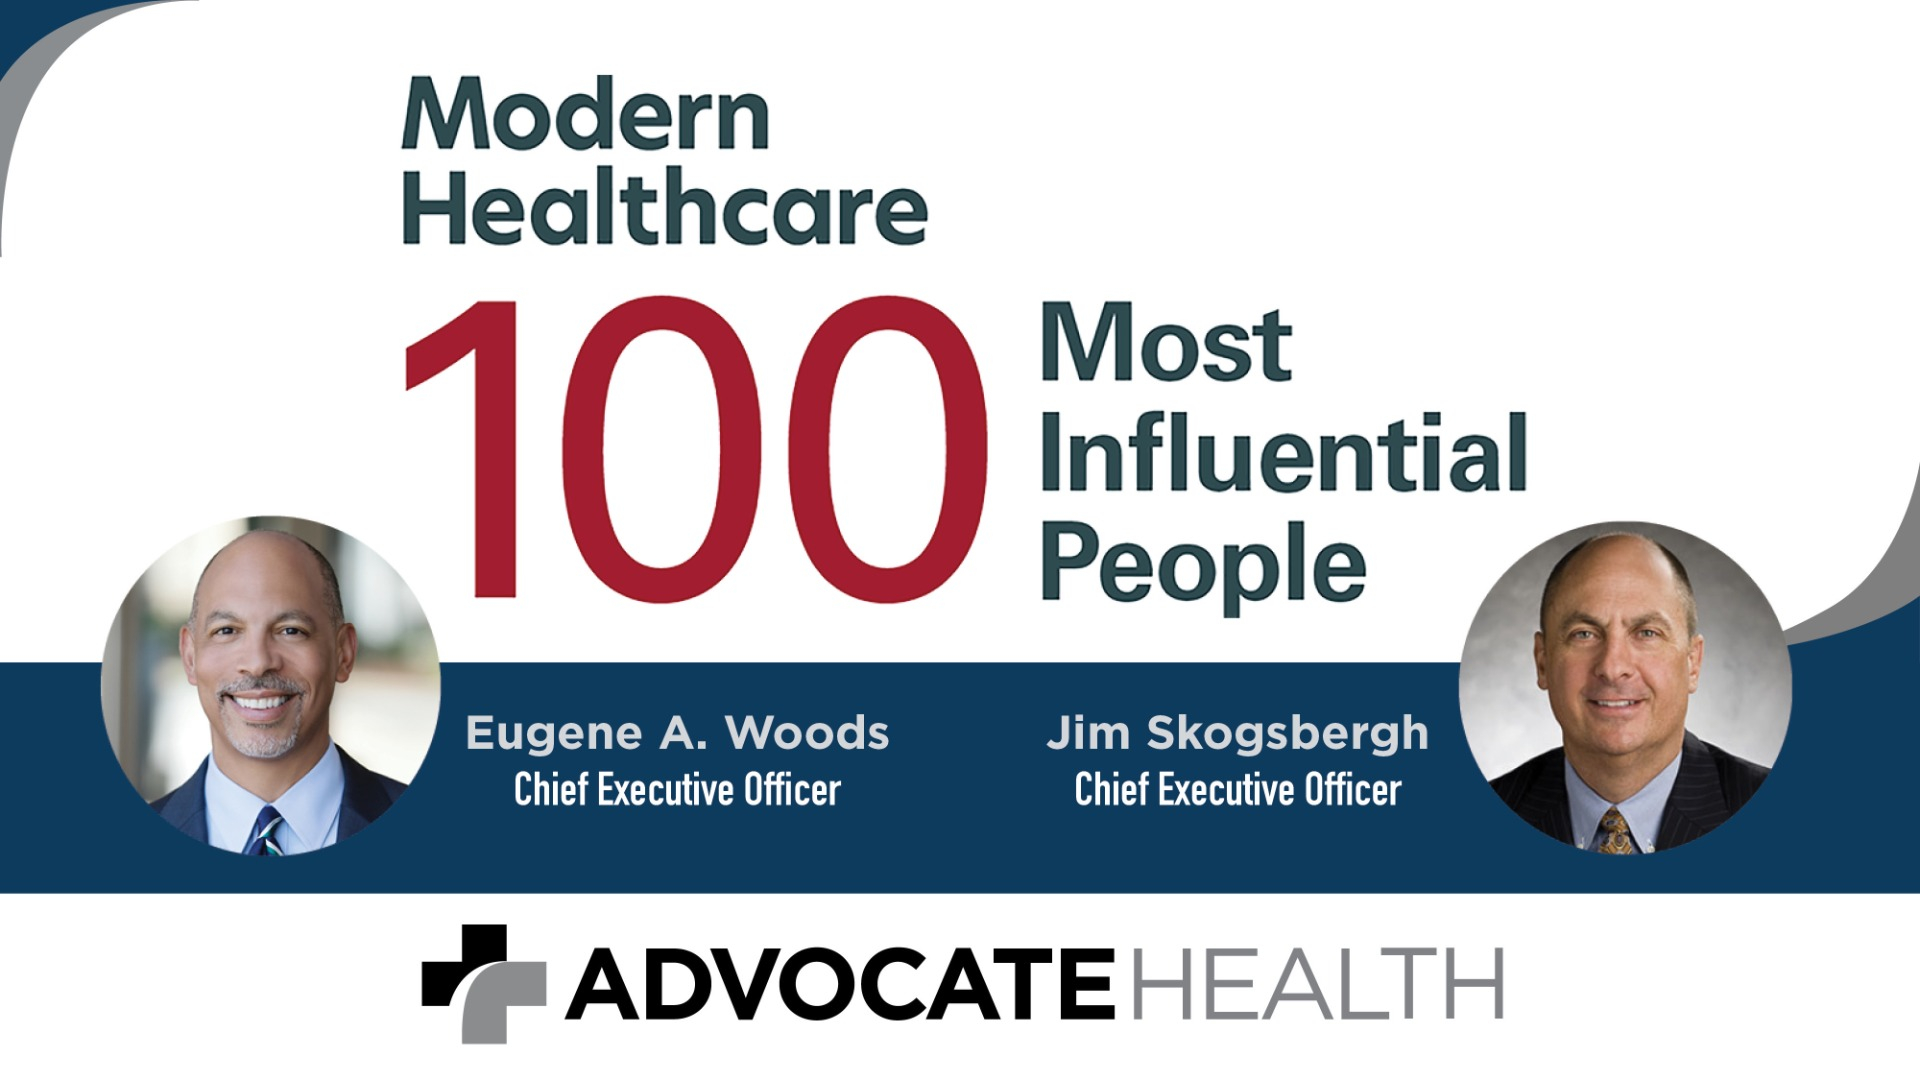 Modern Healthcare 100 featured